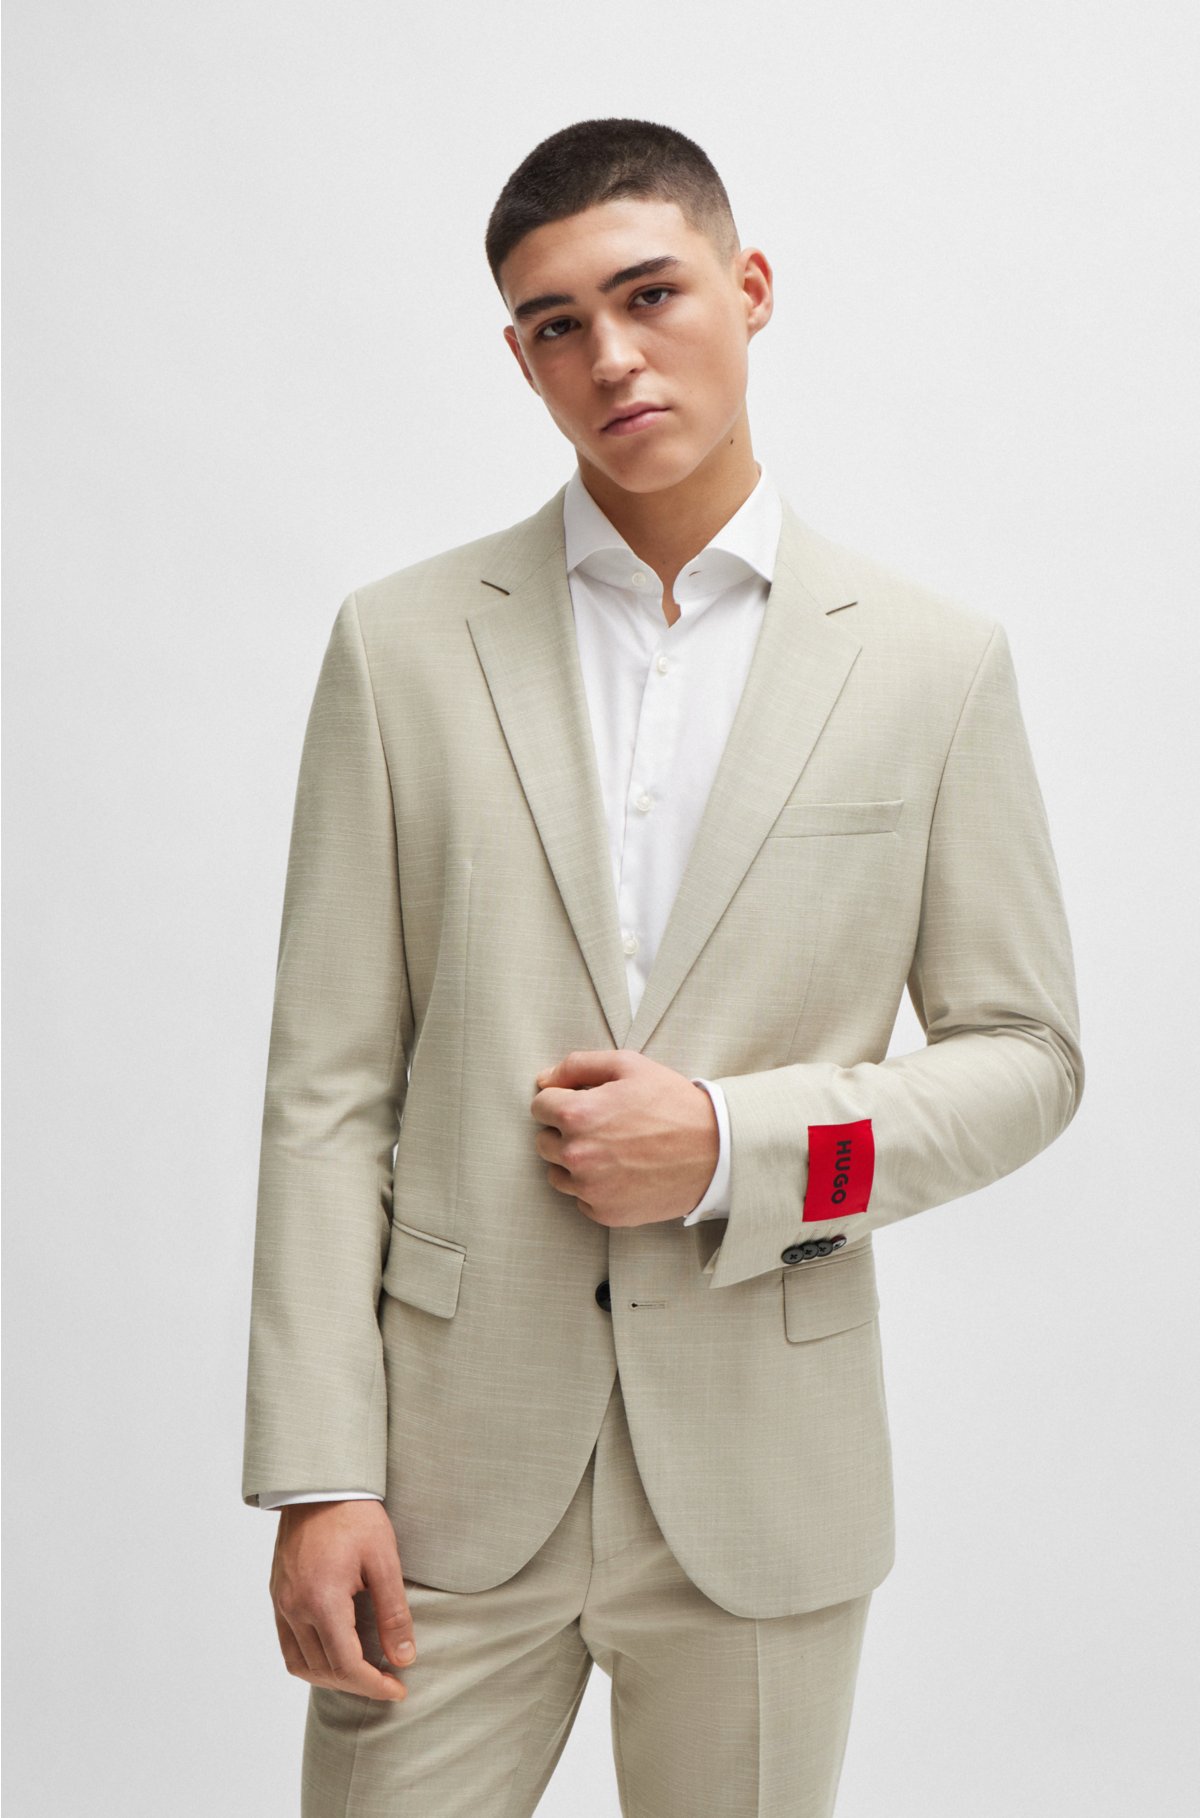 HUGO - Slim-fit suit in patterned performance-stretch fabric